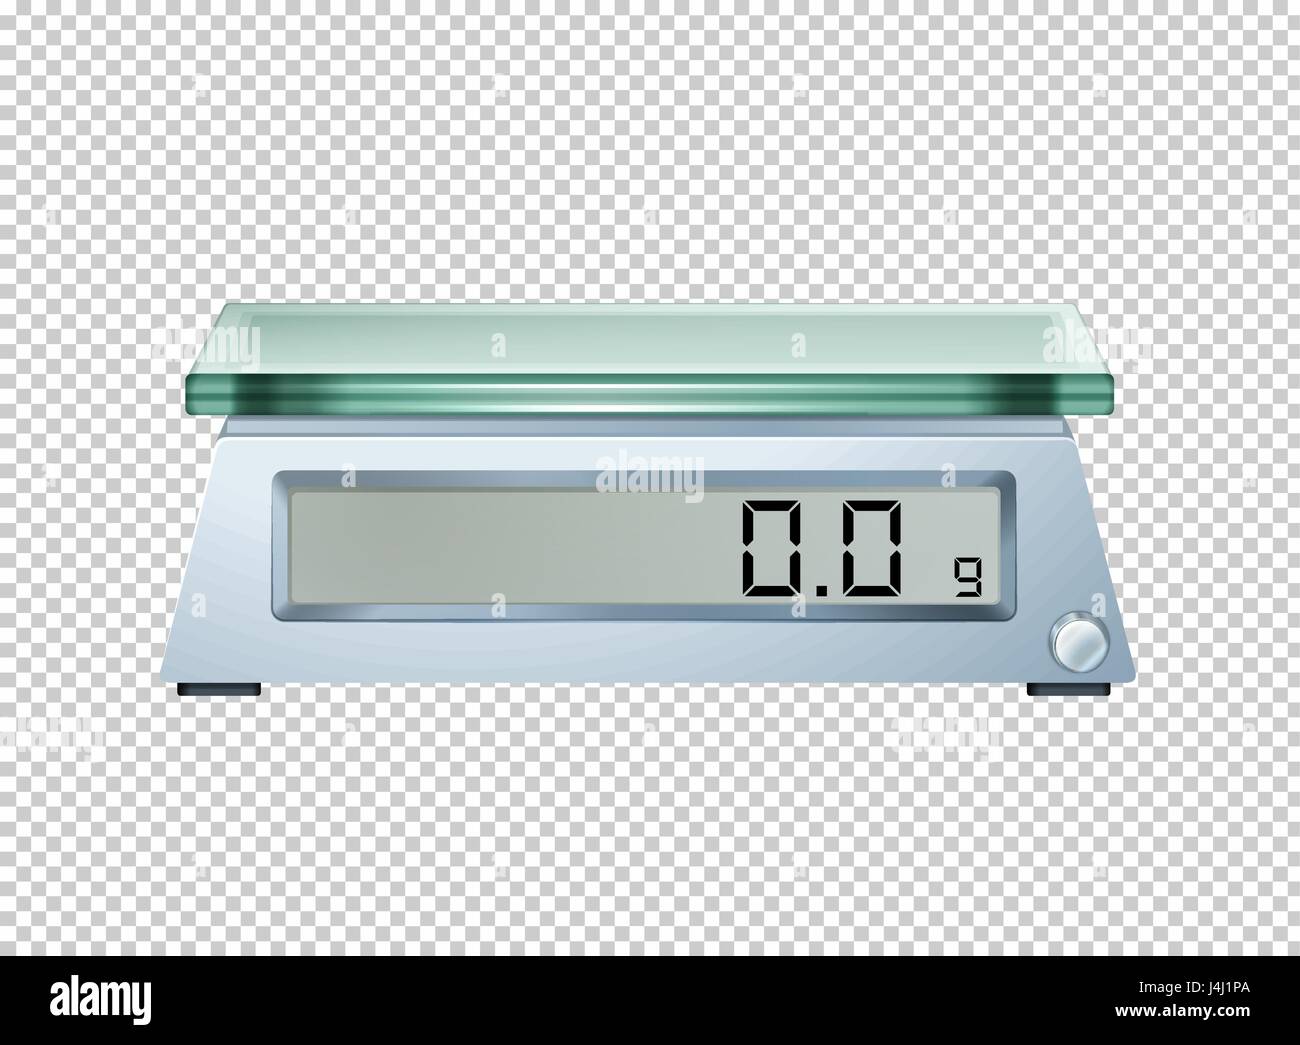 4,875 Small Digital Scale Images, Stock Photos, 3D objects, & Vectors